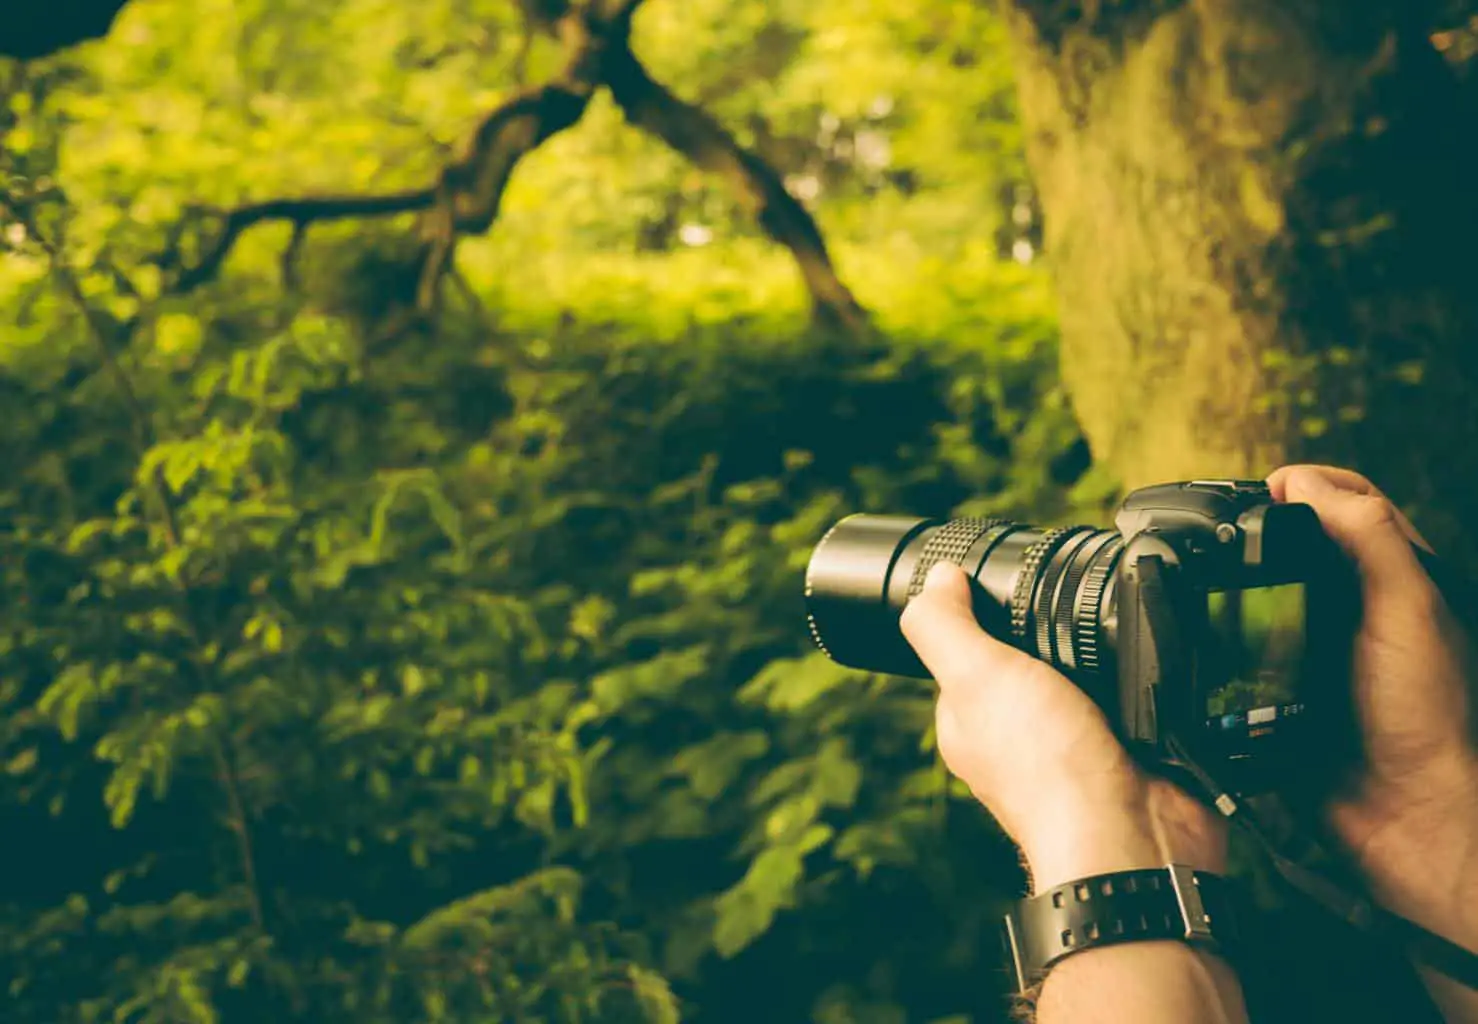 A man taking photos of the trees using a DSLR camera